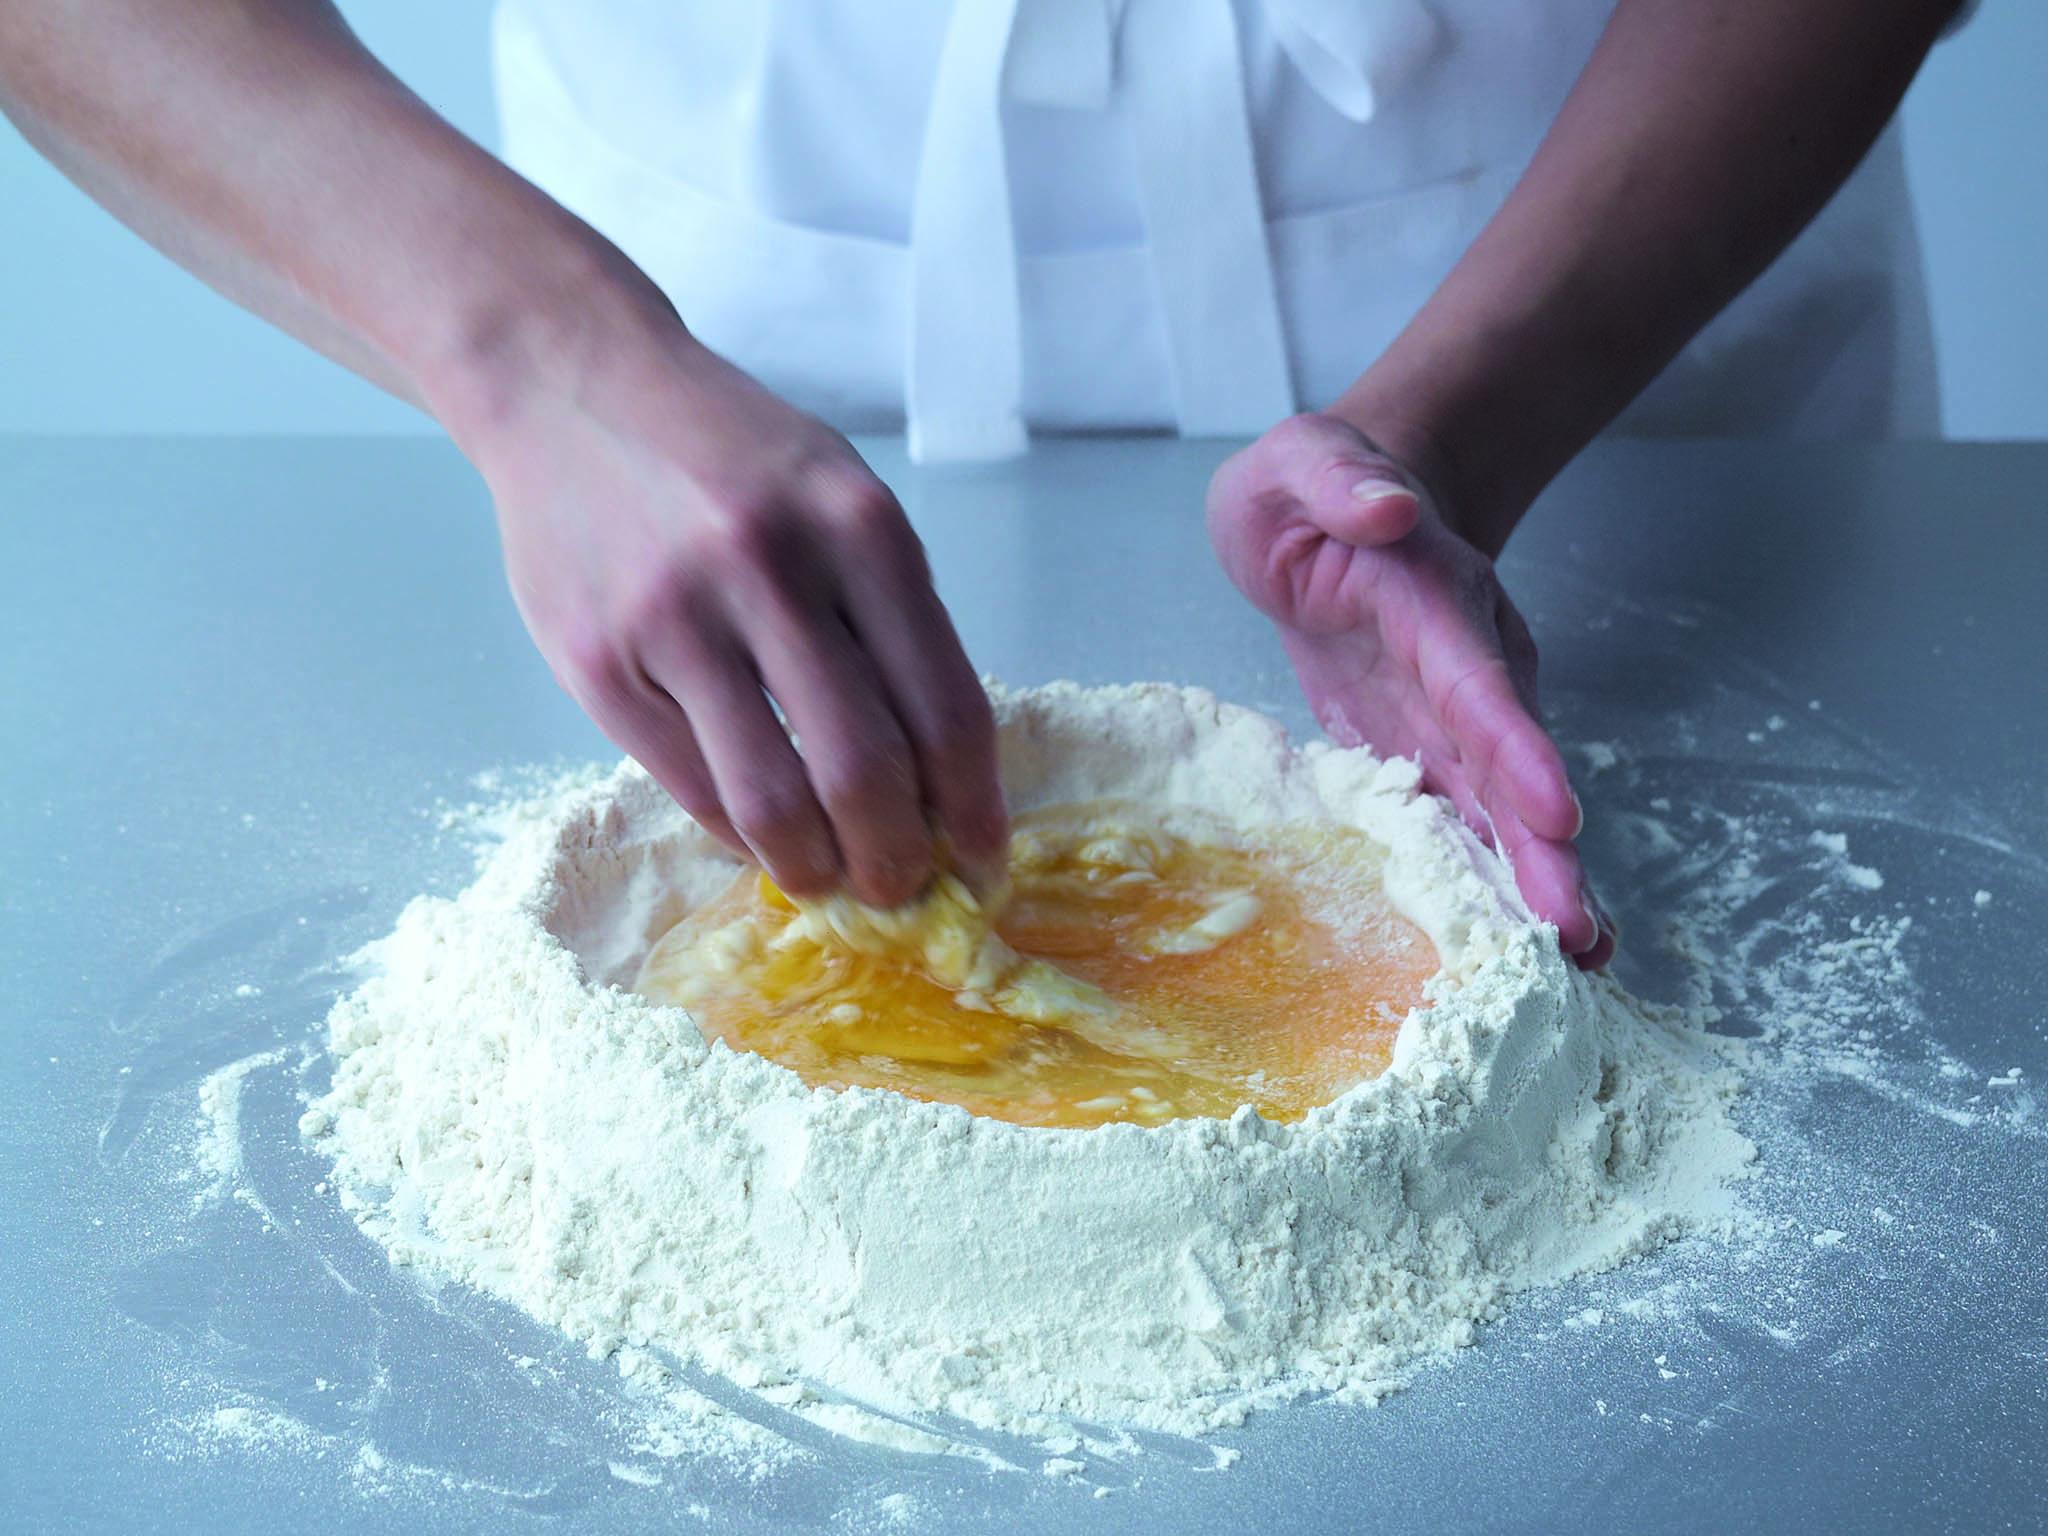 3. Using the fingers of one hand, combine the eggs and oil, gradually drawing in the flour